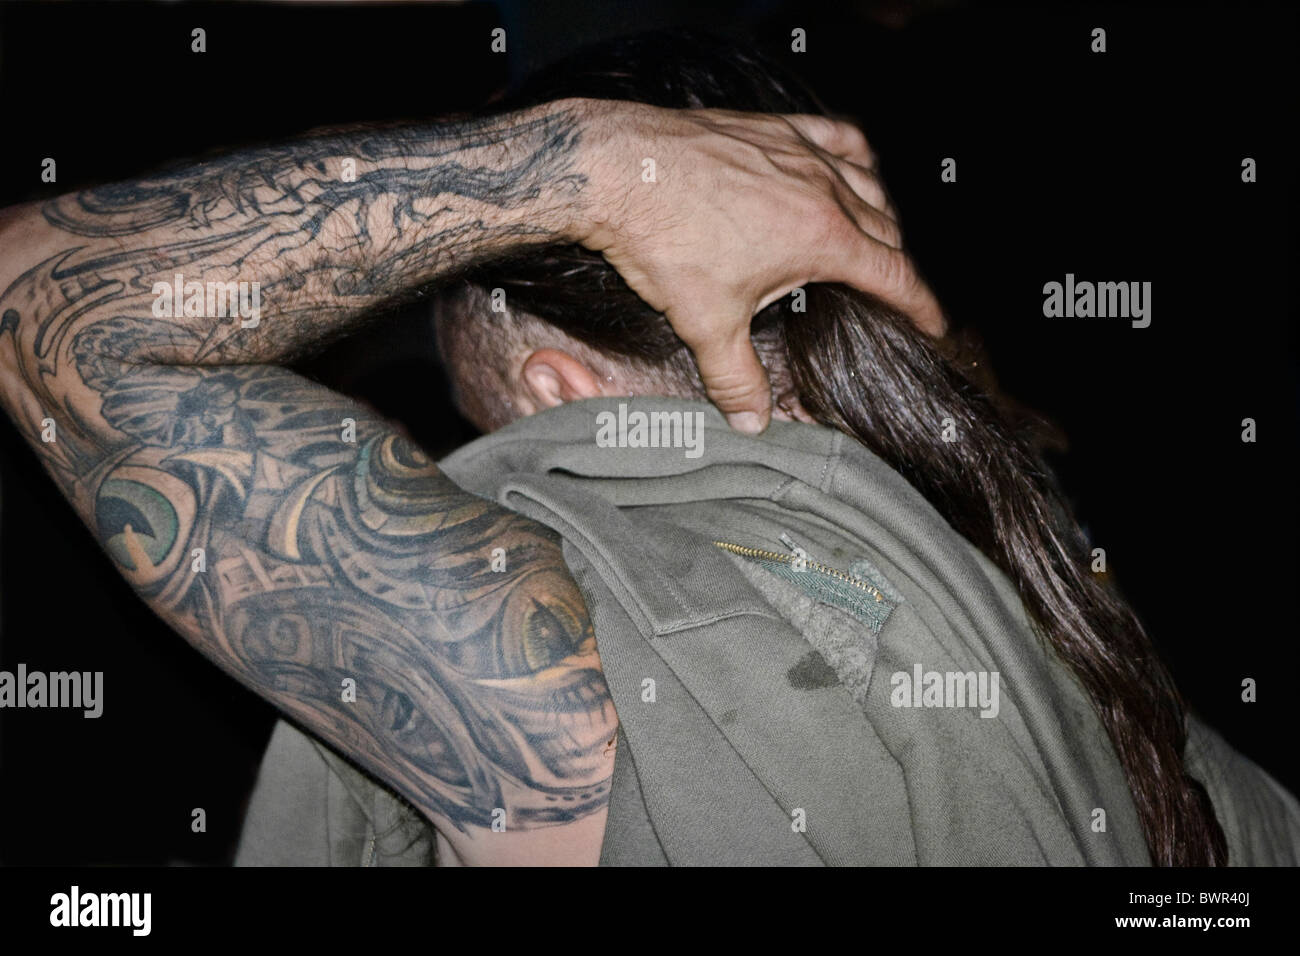 Celtic Tattoo Arm High Resolution Stock Photography And Images Alamy